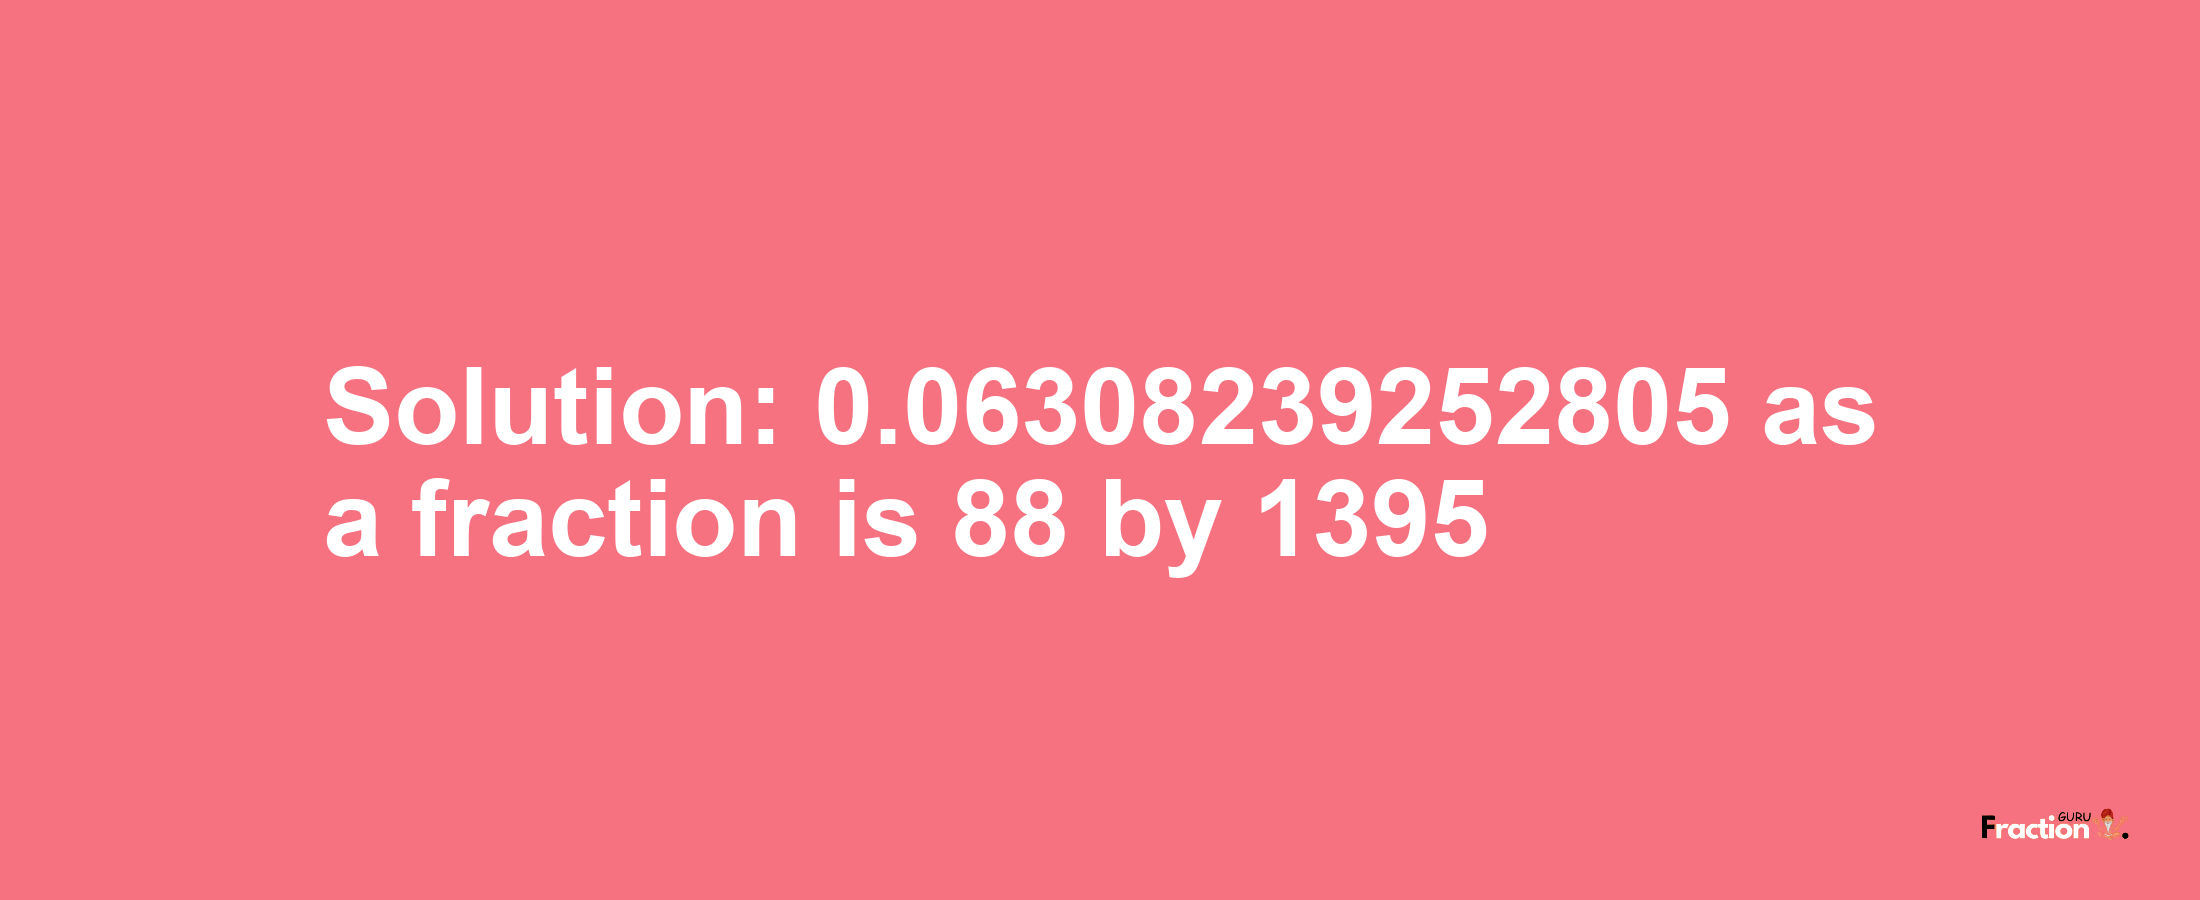 Solution:0.06308239252805 as a fraction is 88/1395